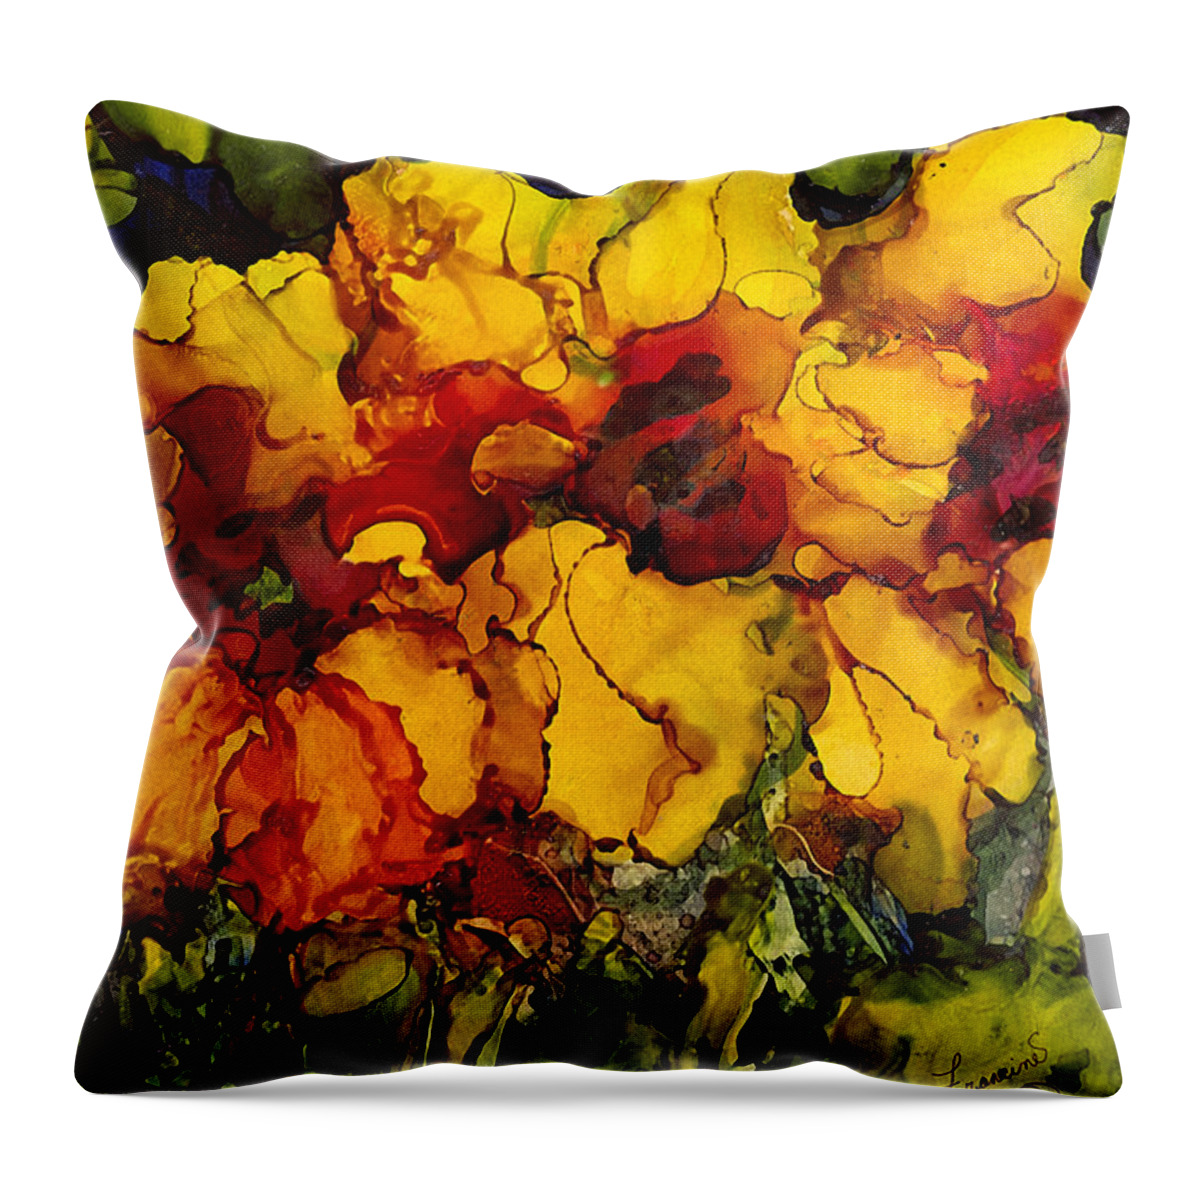 Alcohol Inks Throw Pillow featuring the painting AI-6 Abundance by Francine Dufour Jones